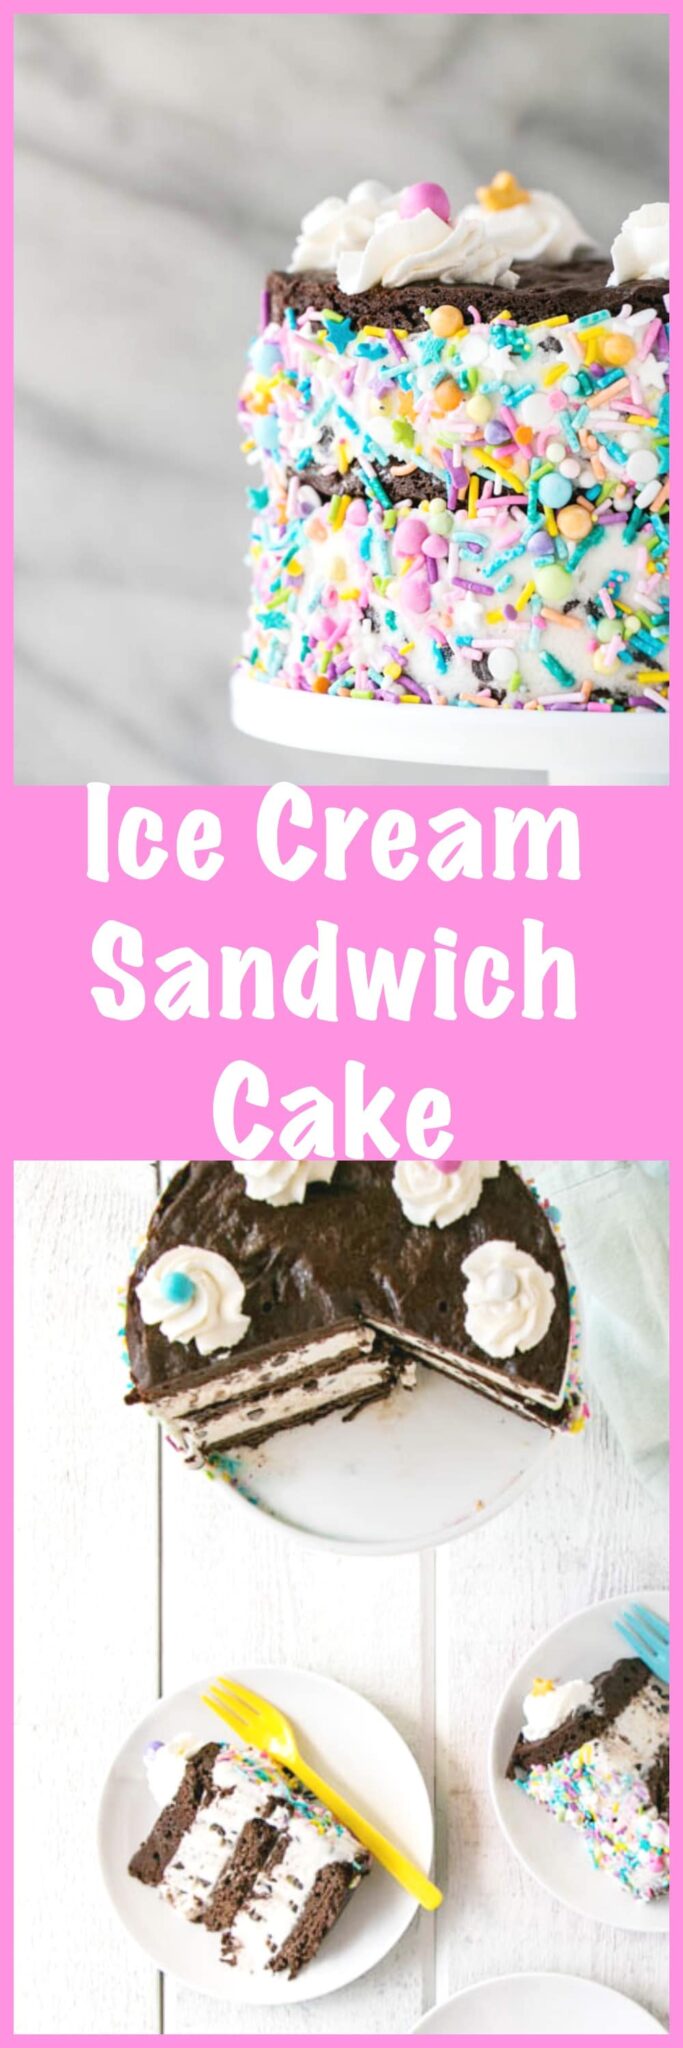 This Ice Cream Sandwich Cake has thin layers of brownie cookie with thick chocolate chip ice cream layers. Topped with whipped cream and extra sprinkles! via @mykitchenlove